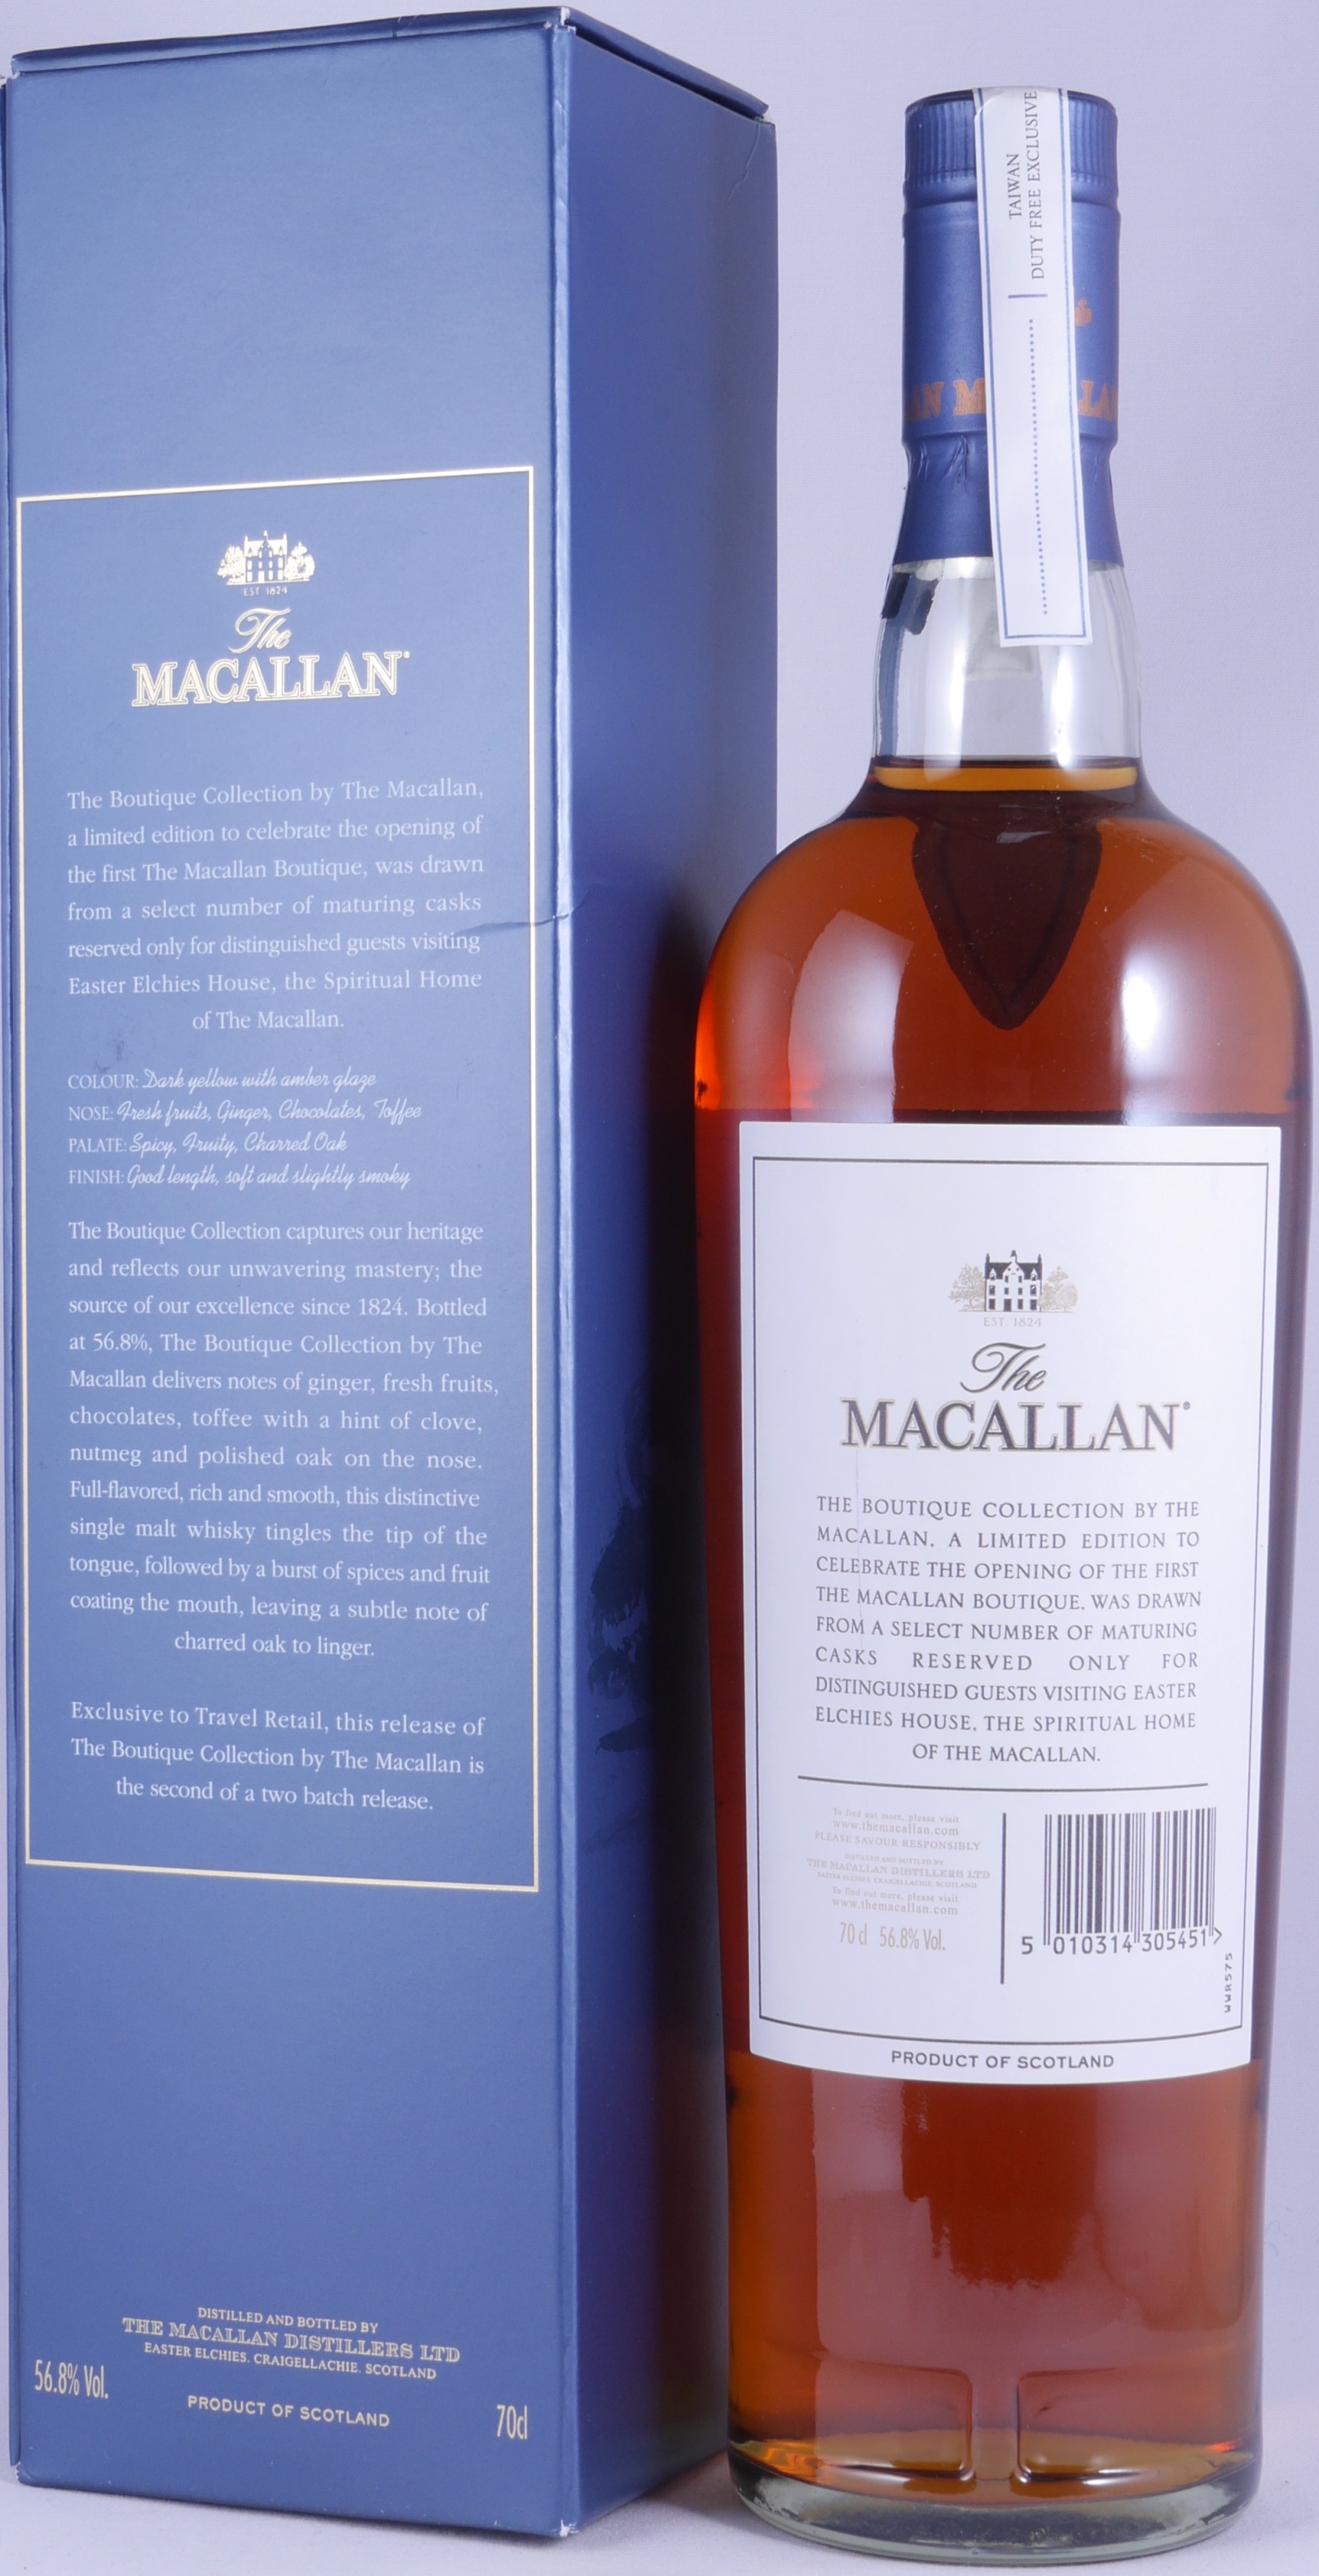 Buy Macallan Boutique Collection Release 2017 Batch No 2 Highland Single Malt Scotch Whisky Cask Strength 56 8 Abv At Amcom Secure Online